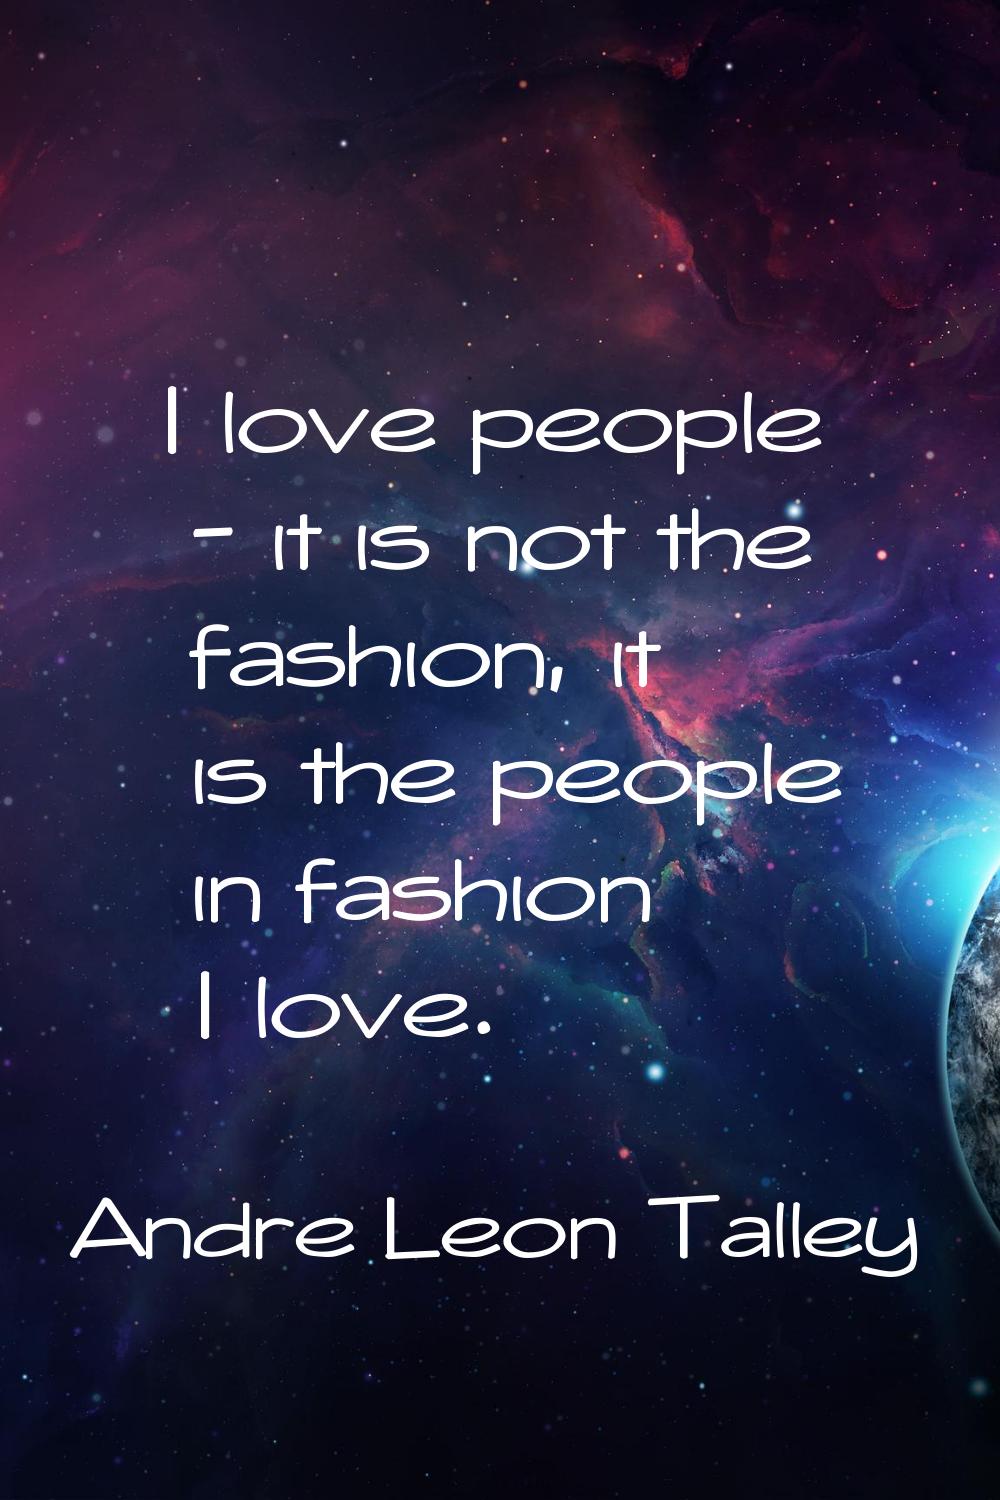 I love people - it is not the fashion, it is the people in fashion I love.